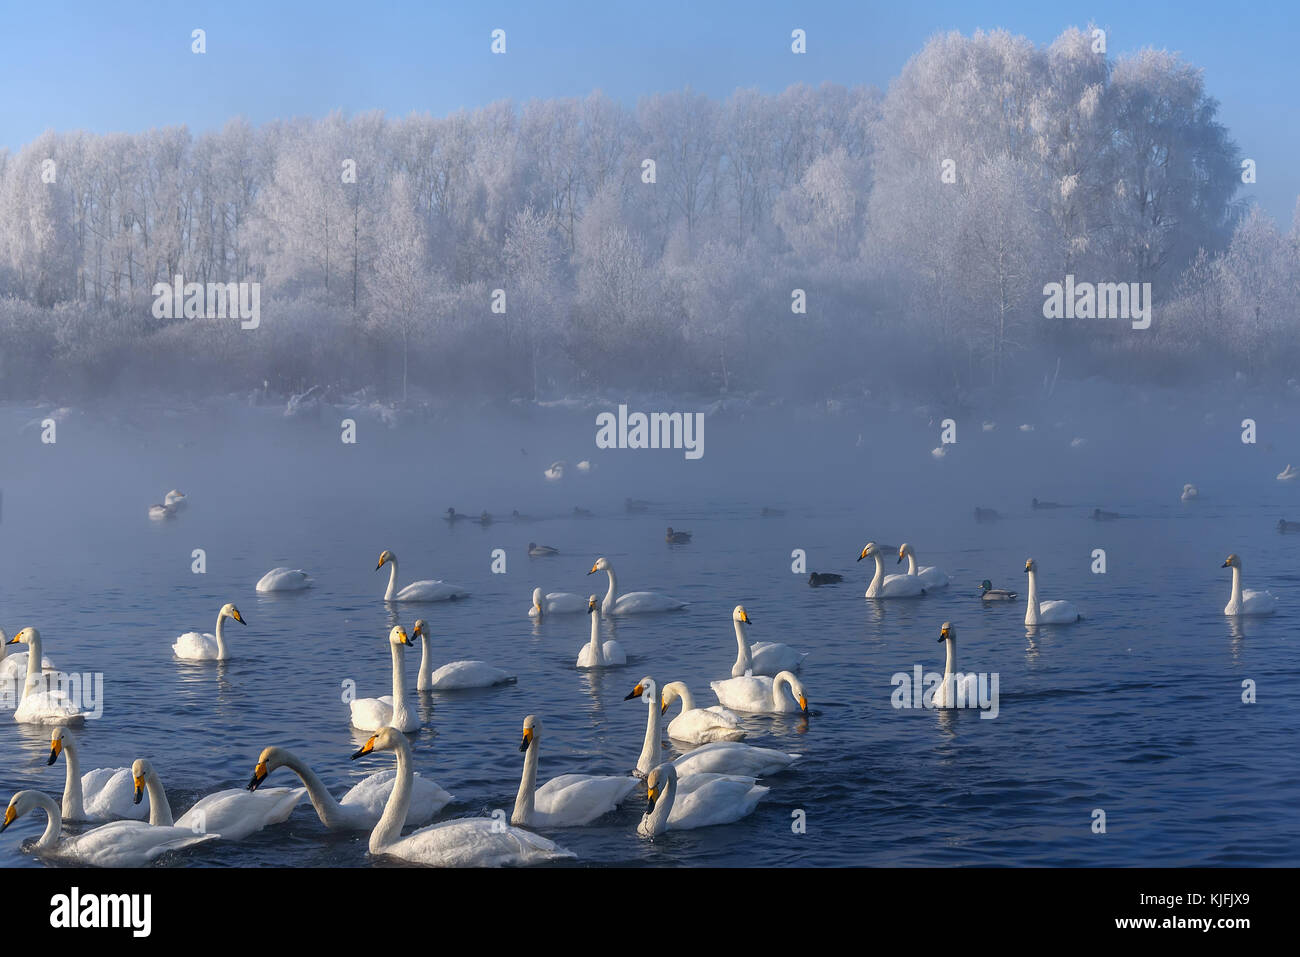 Beautiful winter landscape with swans swimming in the fog on a lake on a frosty sunny day Stock Photo